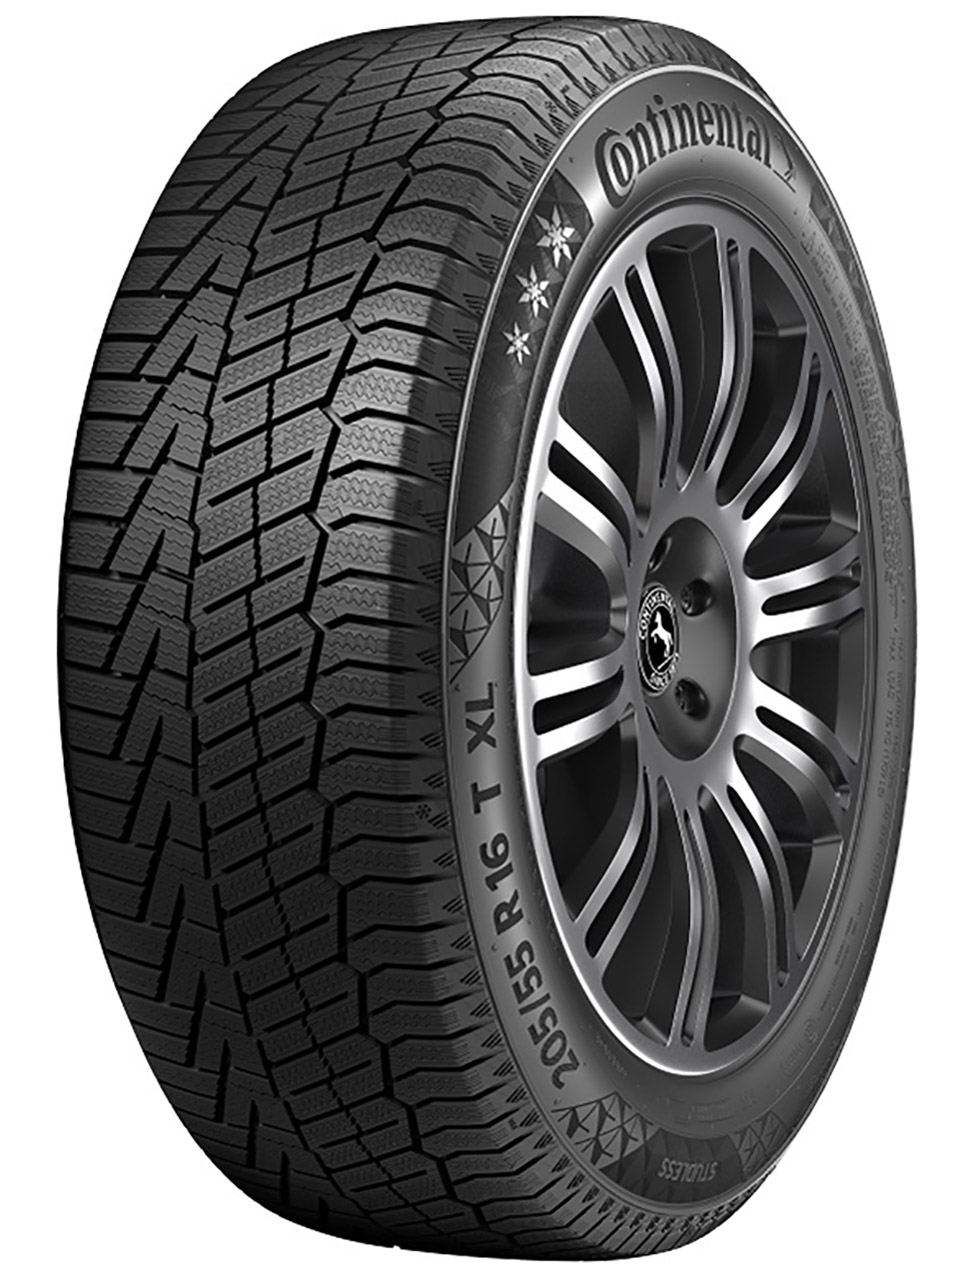 Continental NorthContact 225/50R17 98T XL